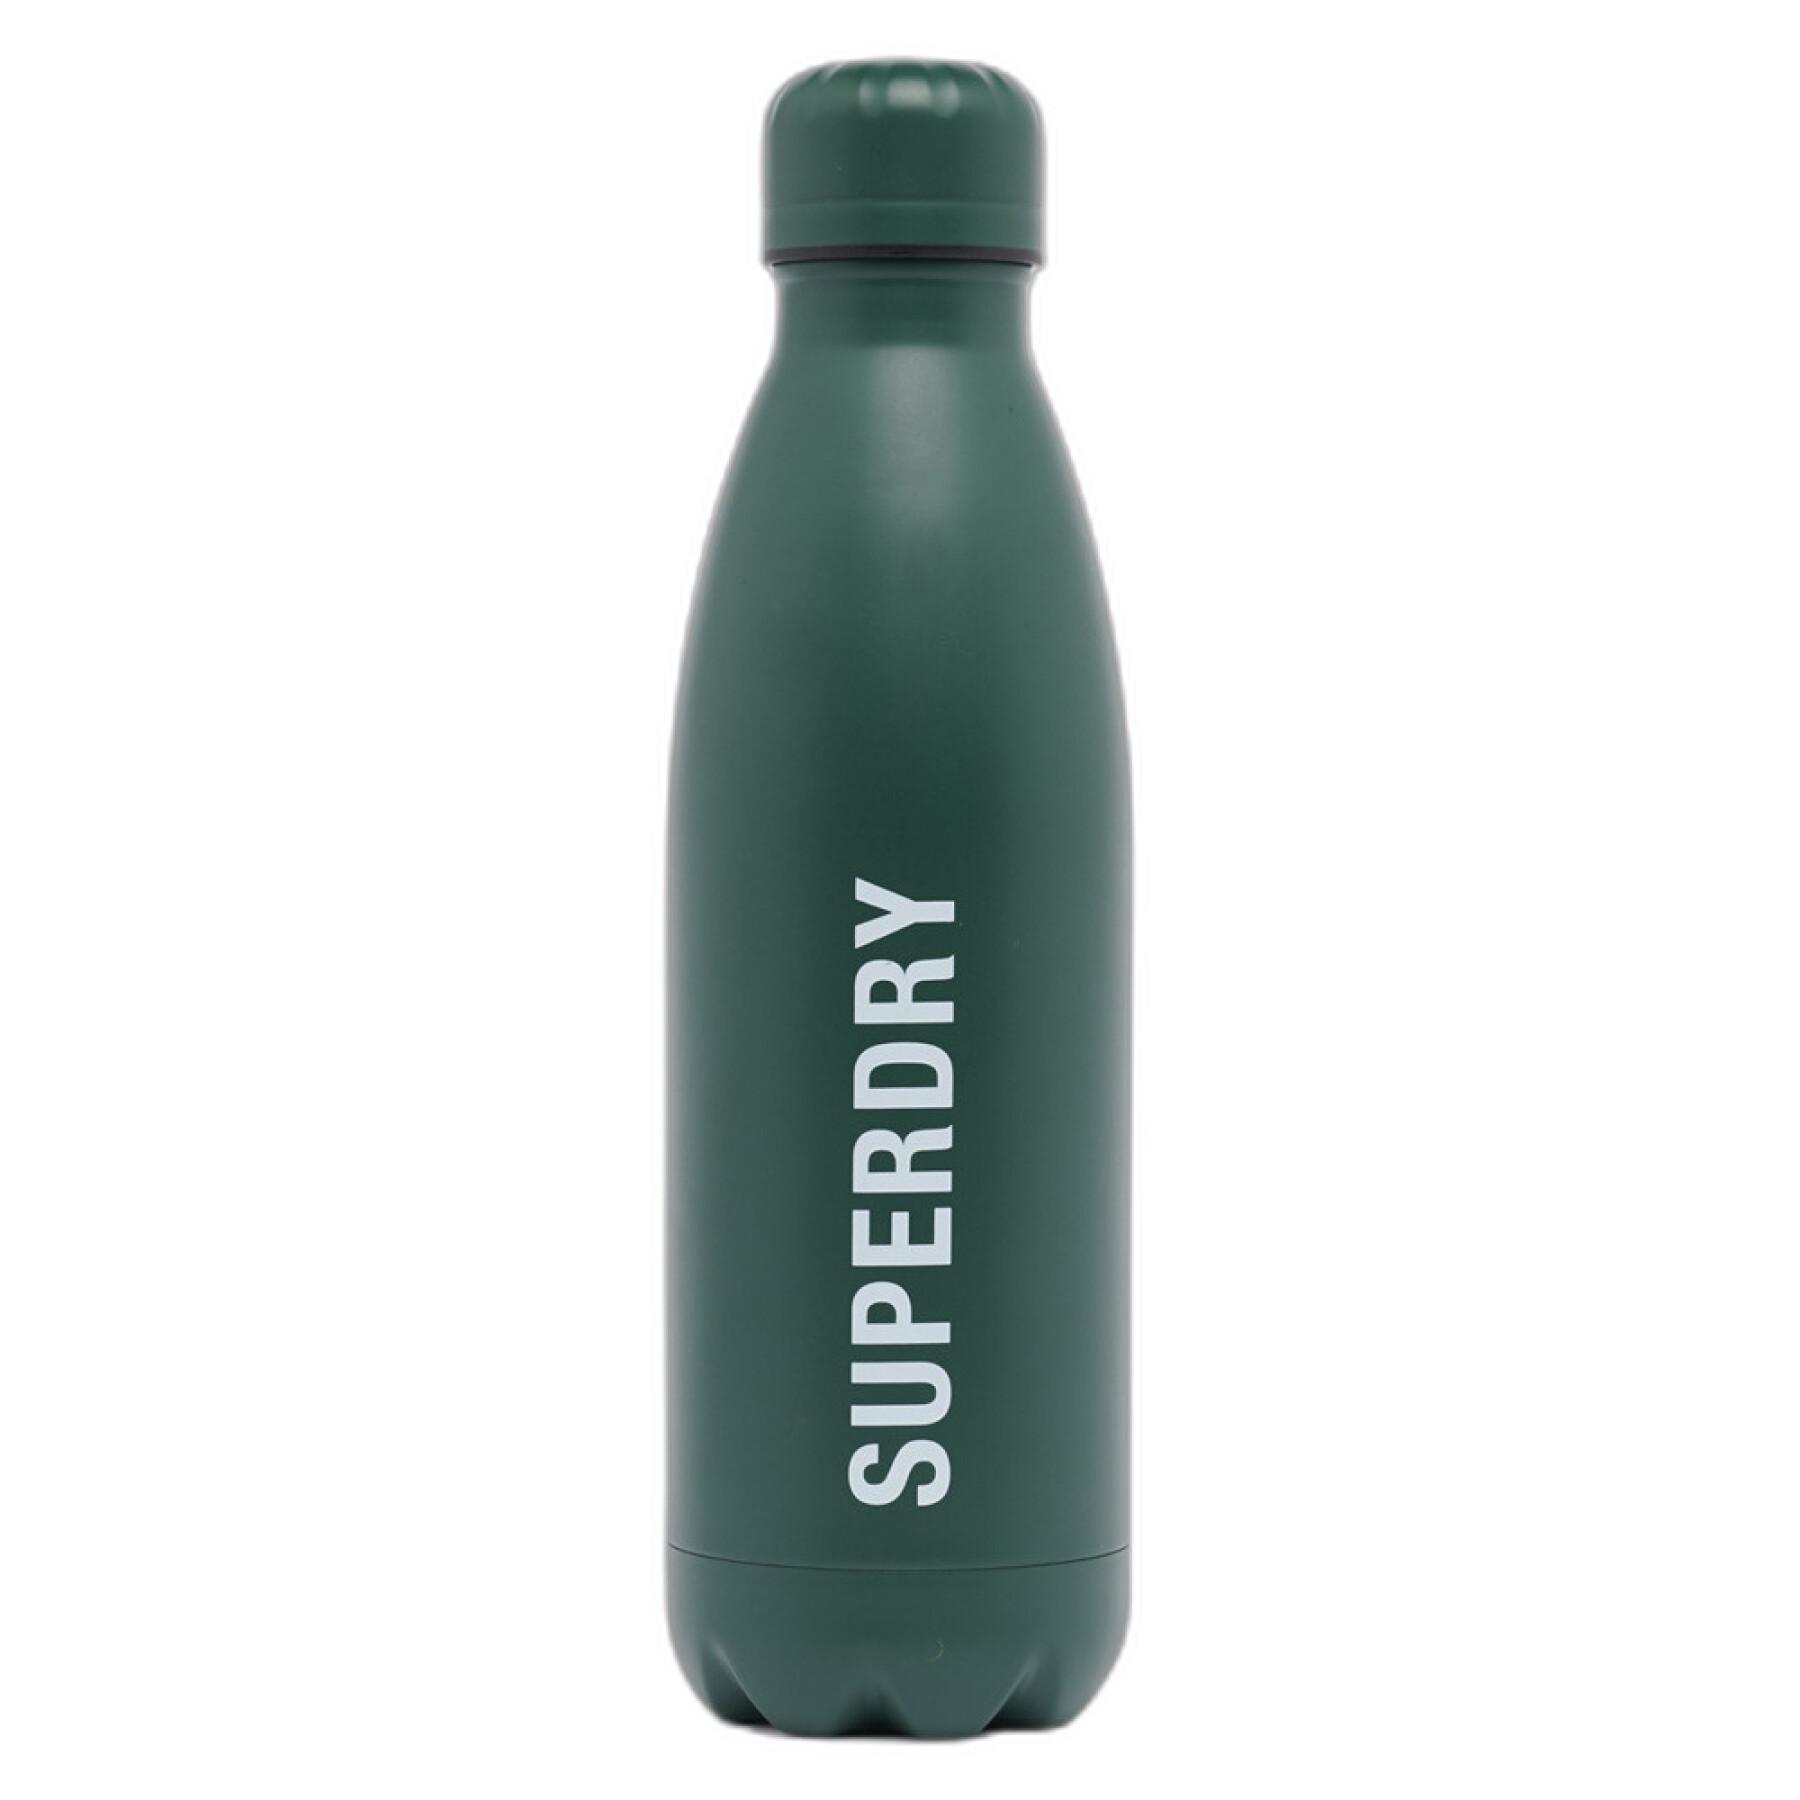 Fles Superdry Sportstyle